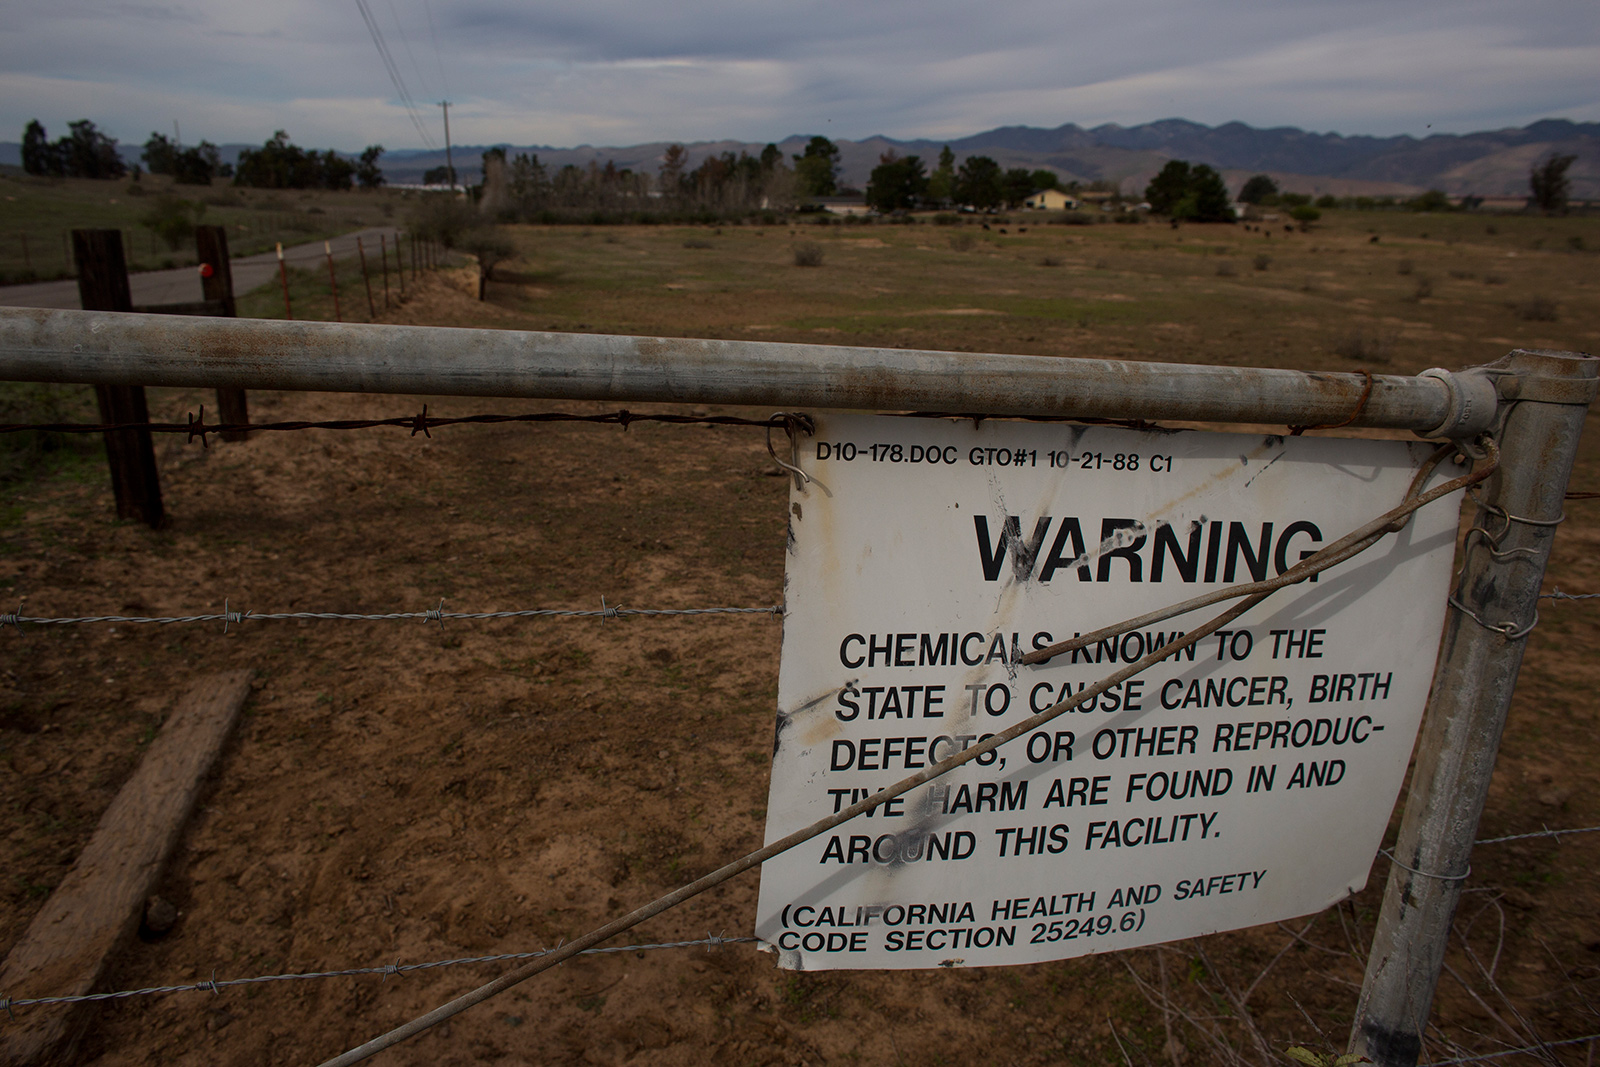 alarm-over-crops-raised-on-fracking-waste-in-california